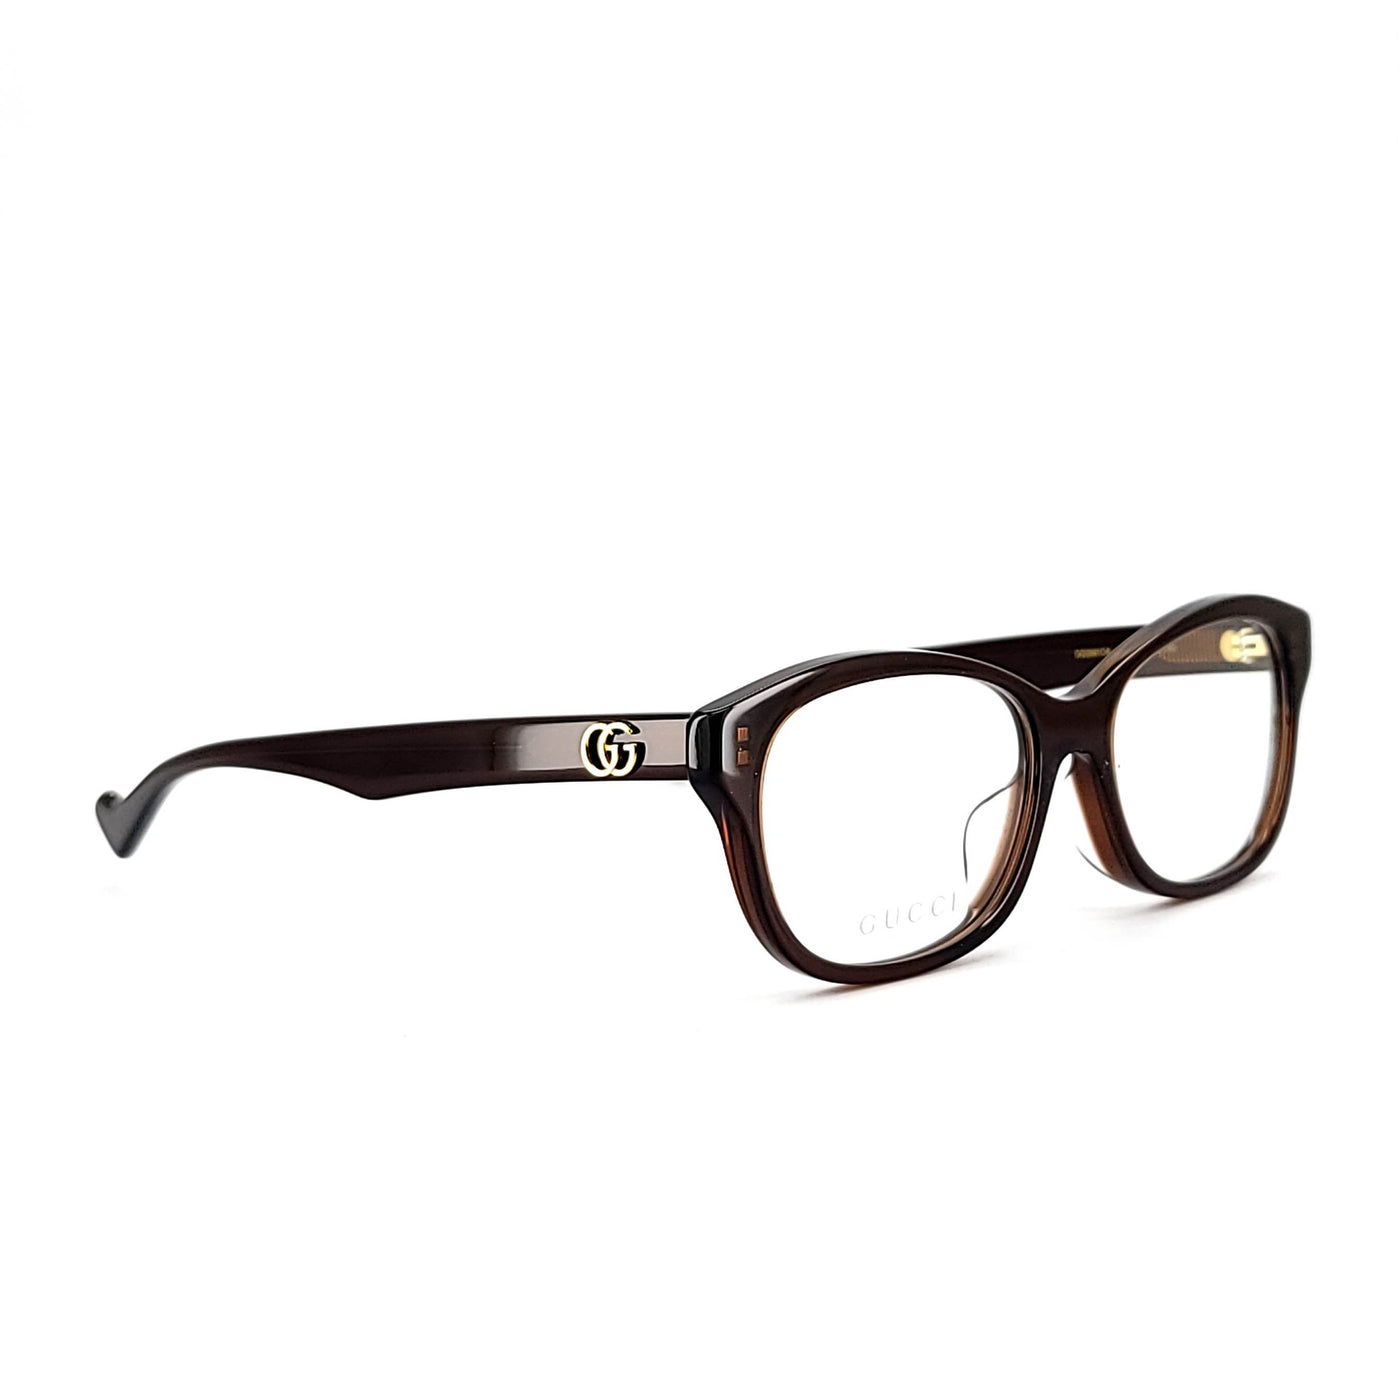 Gucci GG 0961OA/003 | Eyeglasses - Vision Express Optical Philippines